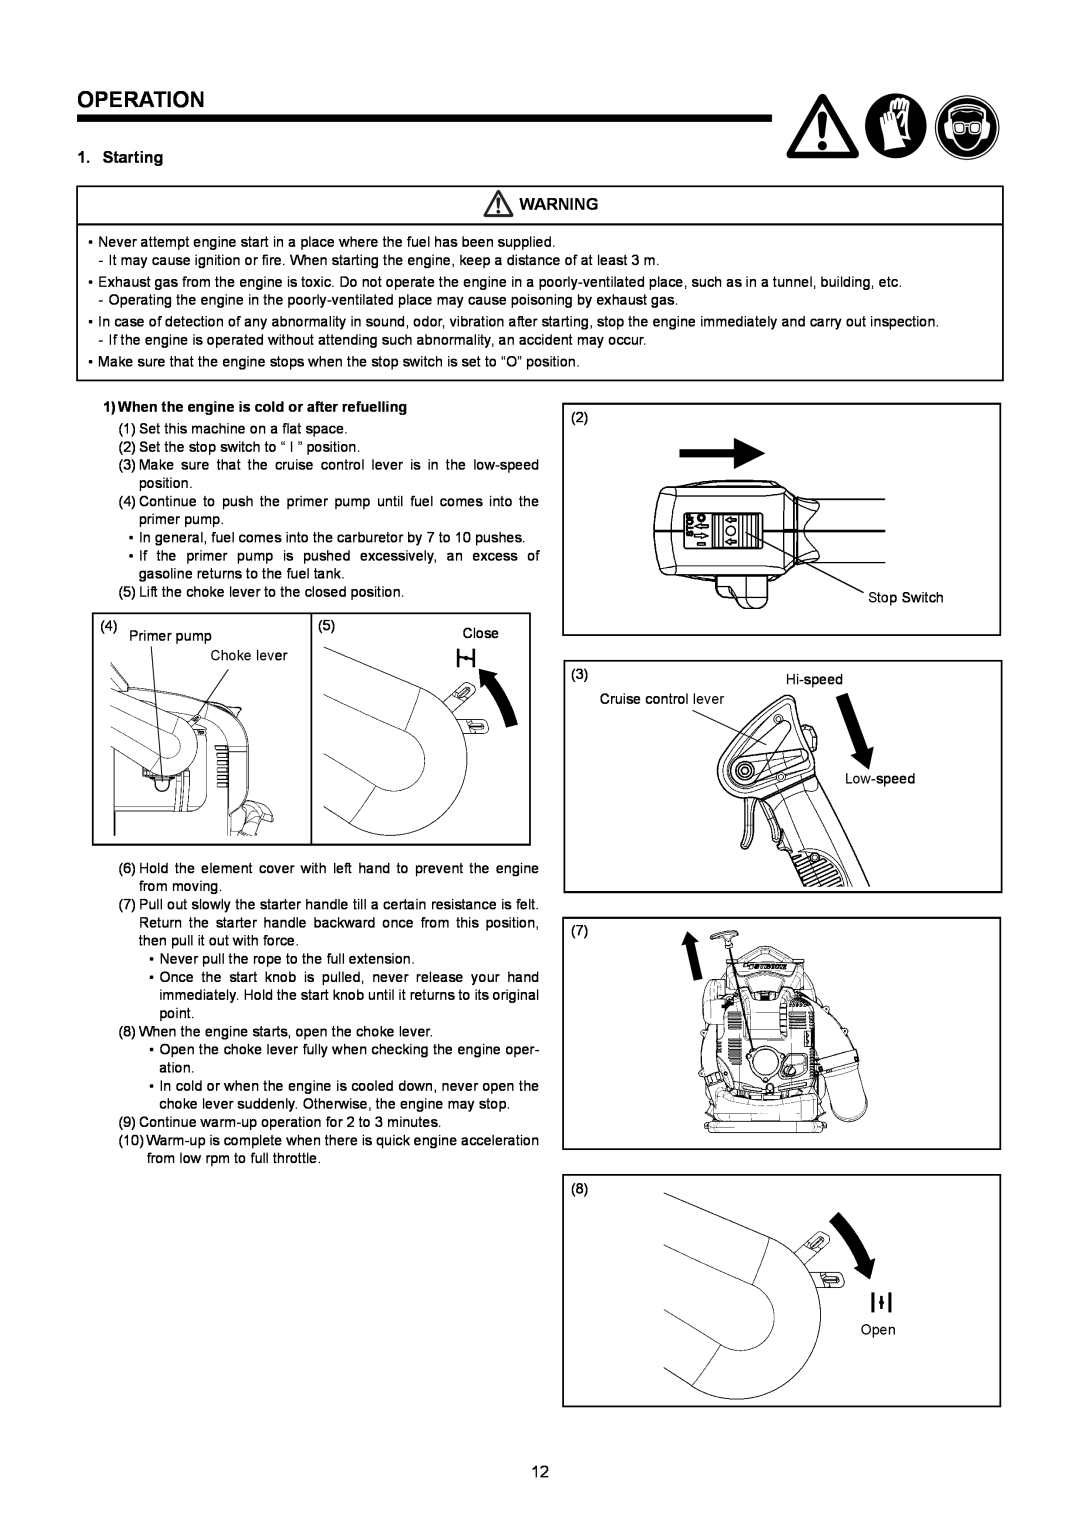 Makita BBX7600CA instruction manual Operation, Starting, When the engine is cold or after refuelling 